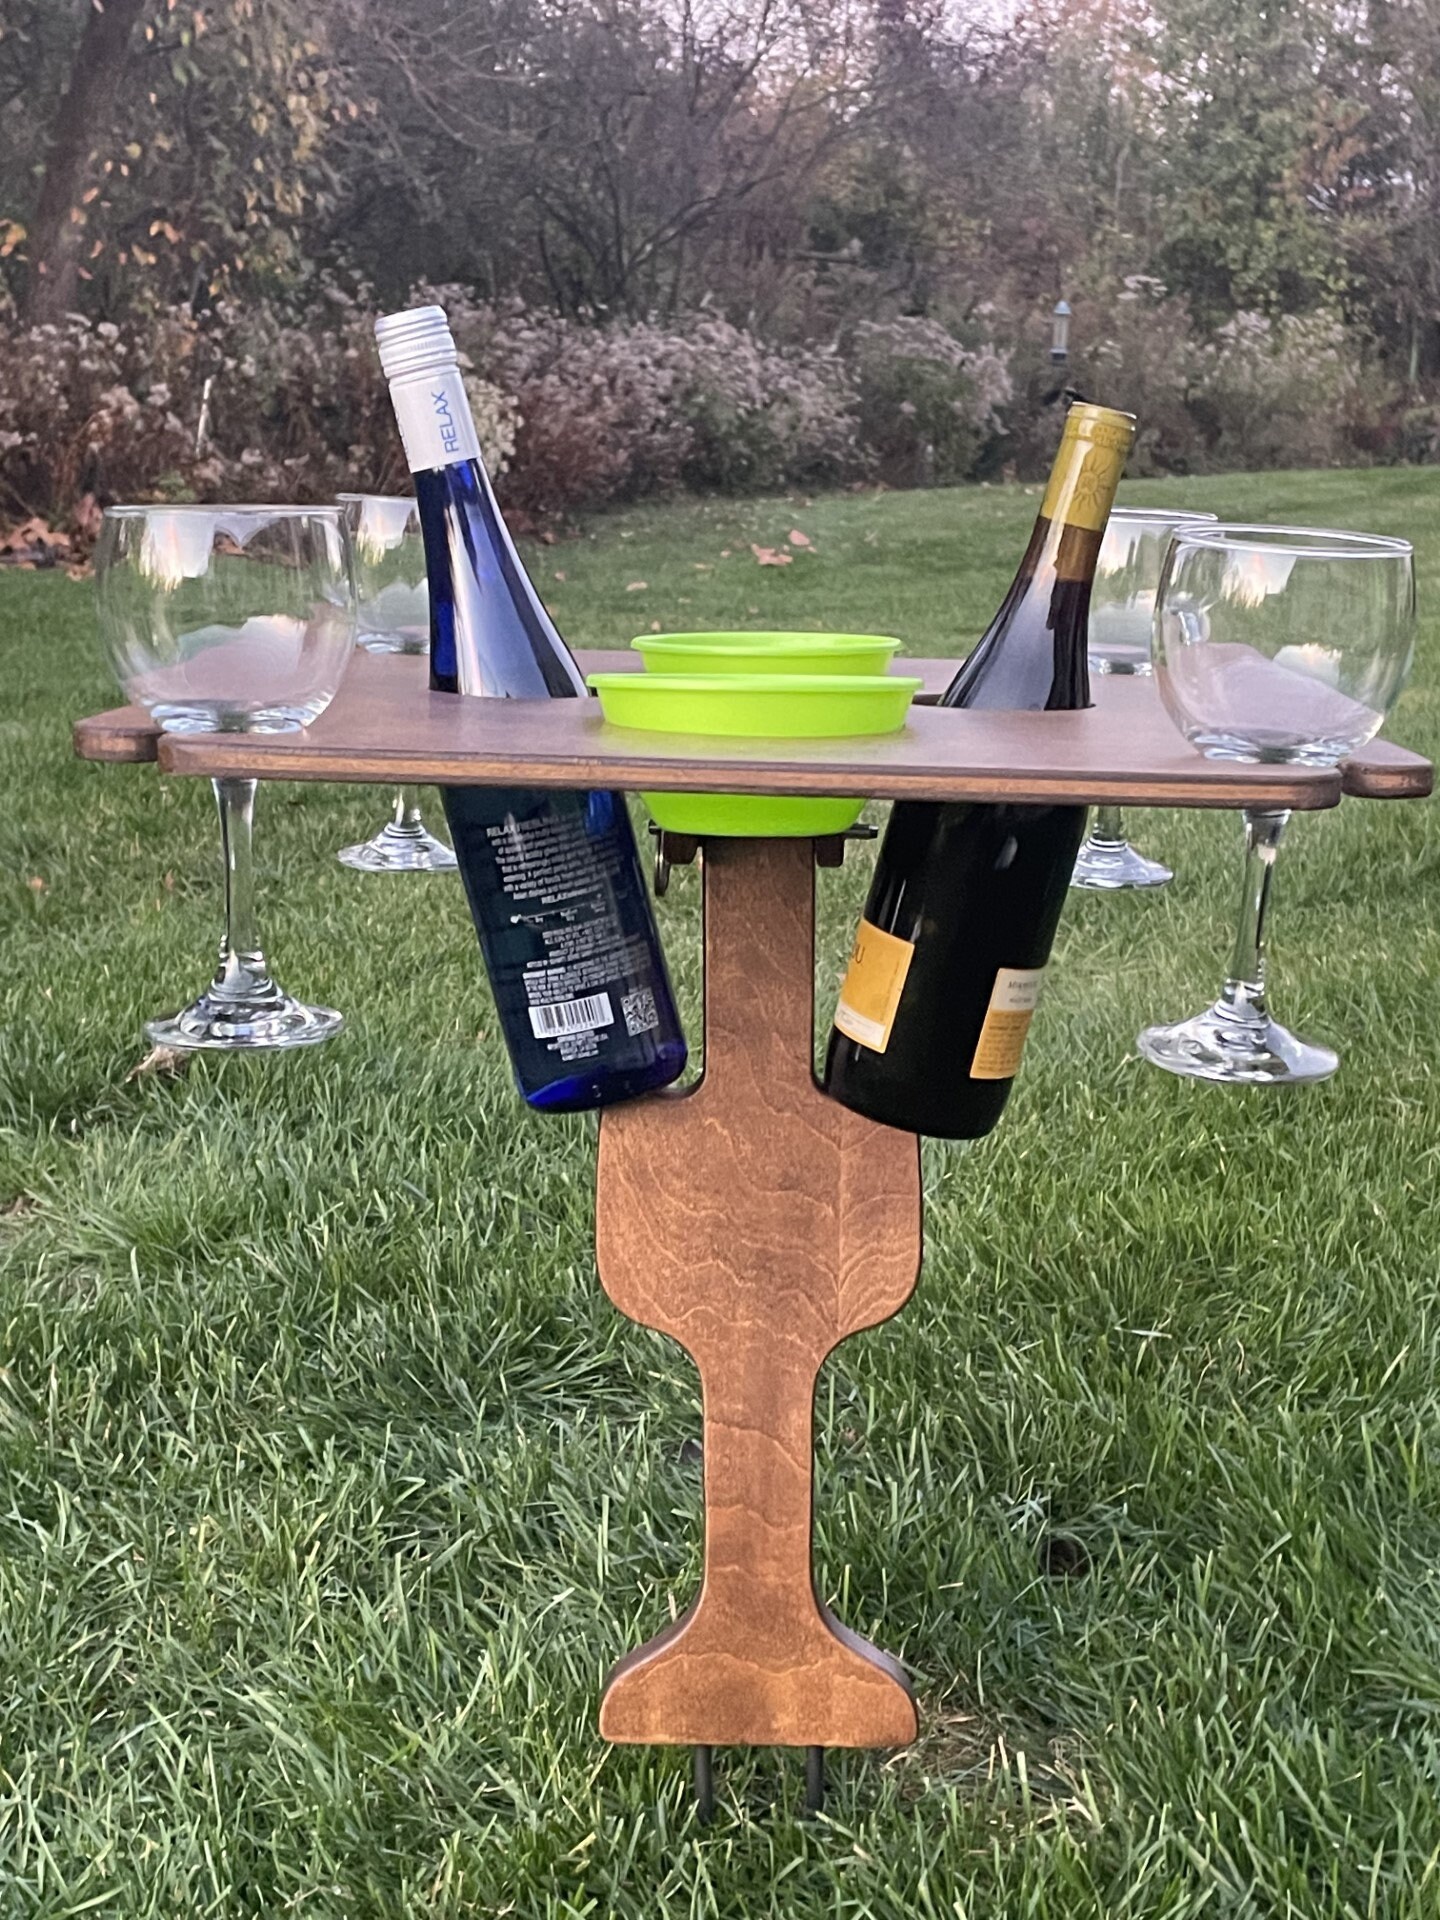 11½ Oz. Deluxe Portable-Collapsible Wine Glass - PORTABLEWINEGLASS -  IdeaStage Promotional Products